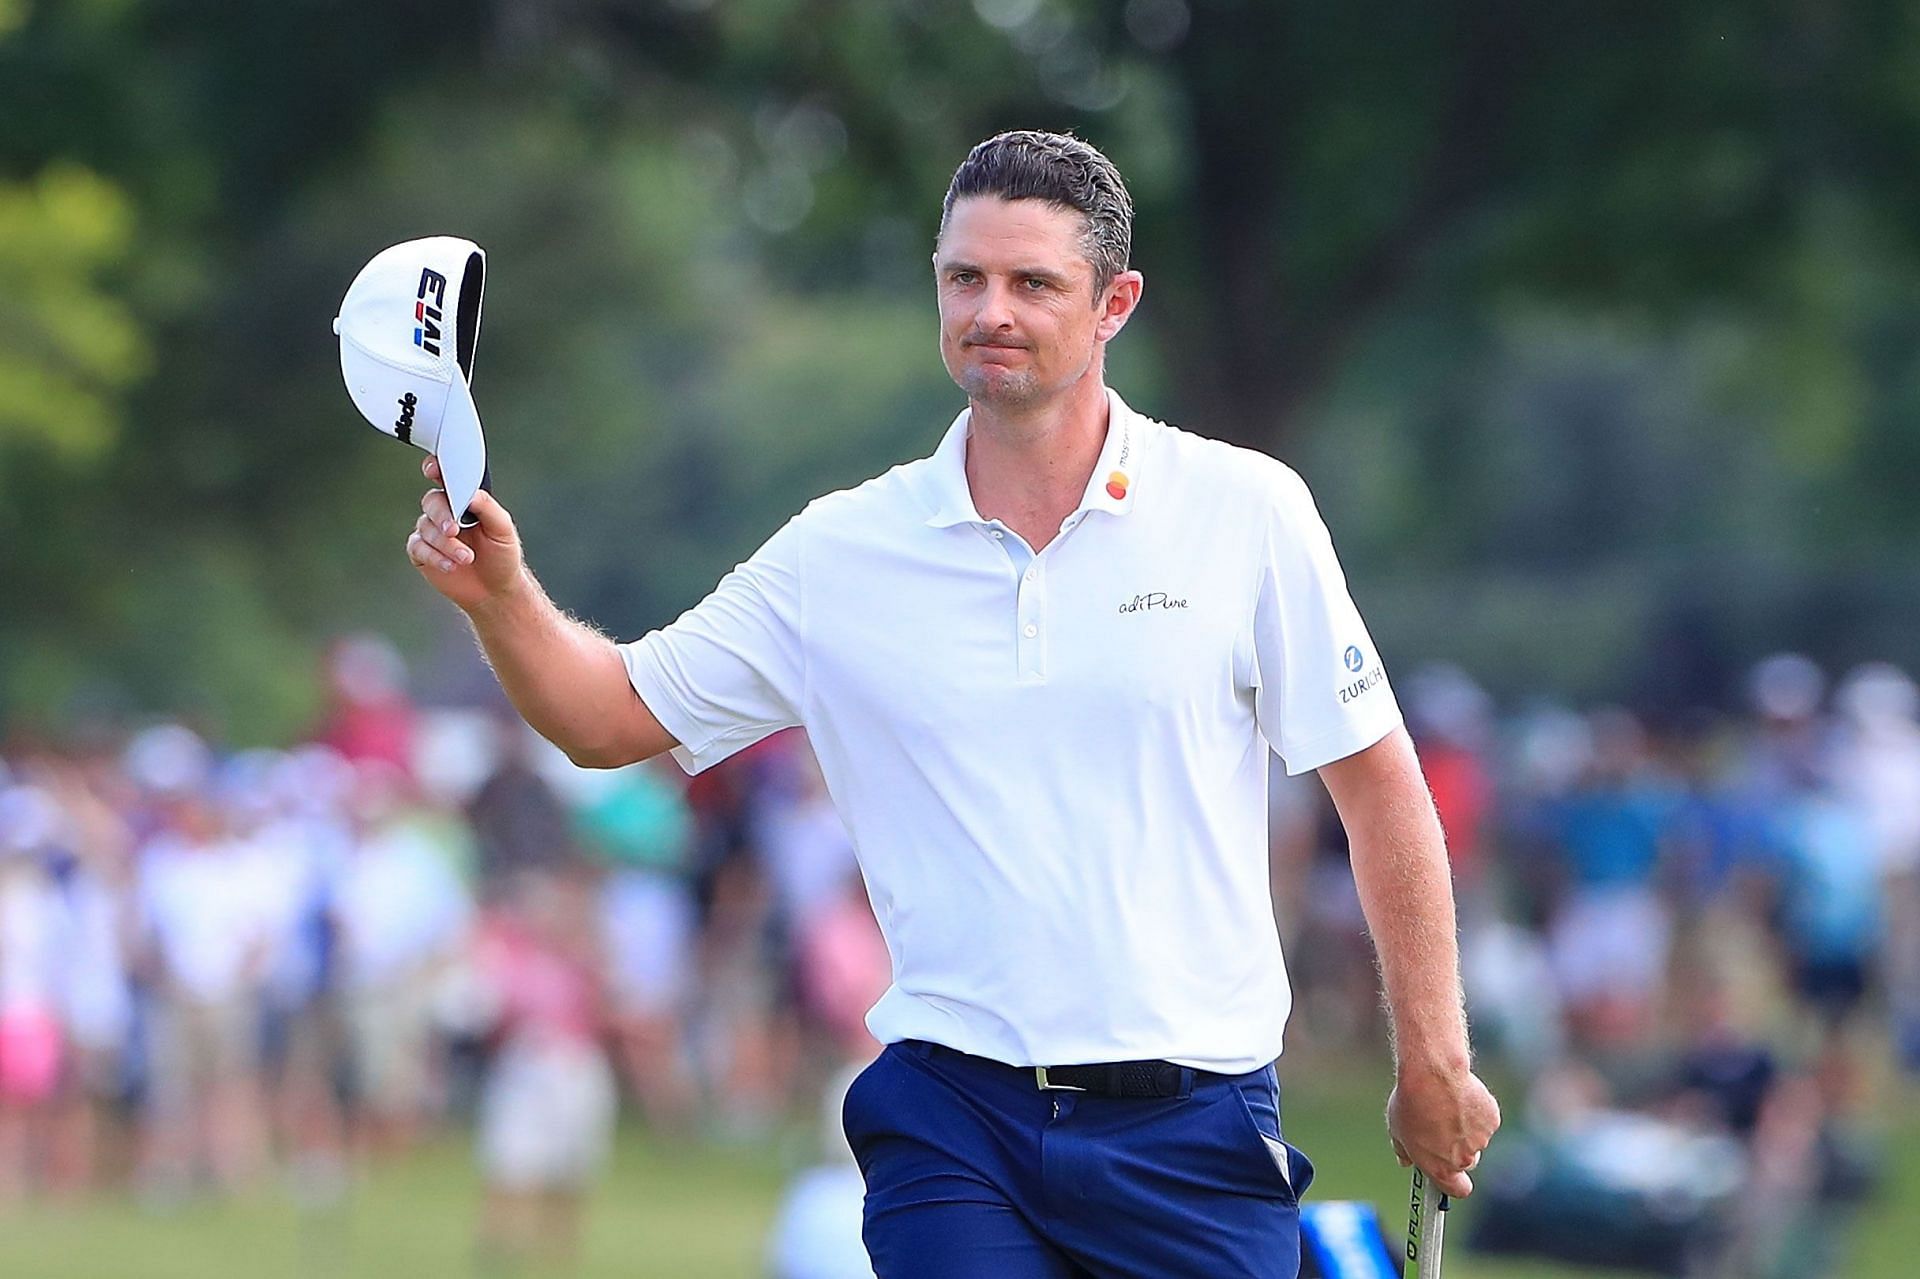 Justin Rose leads so far at the AT&amp;T Pebble Beach Pro-Am